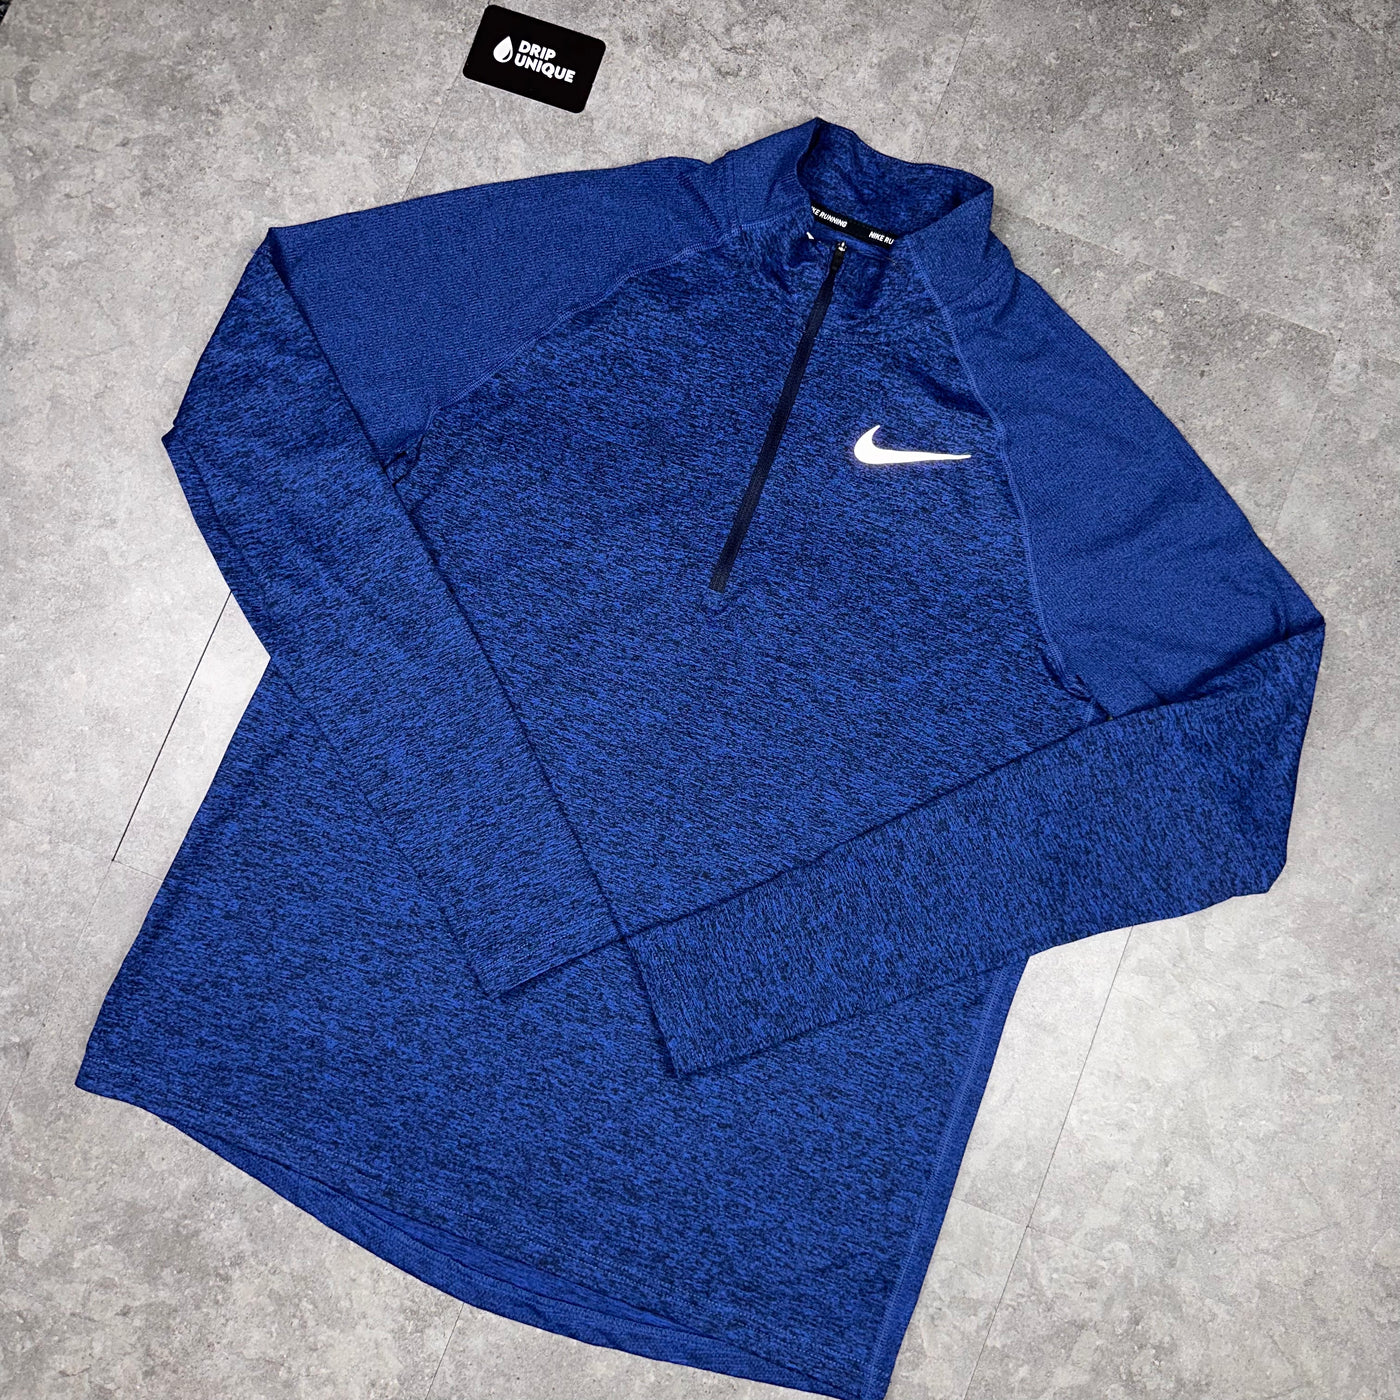 Men's Nike Therma 1/4 Zip Top in a Royal Blue colourway, dripuniqueuk